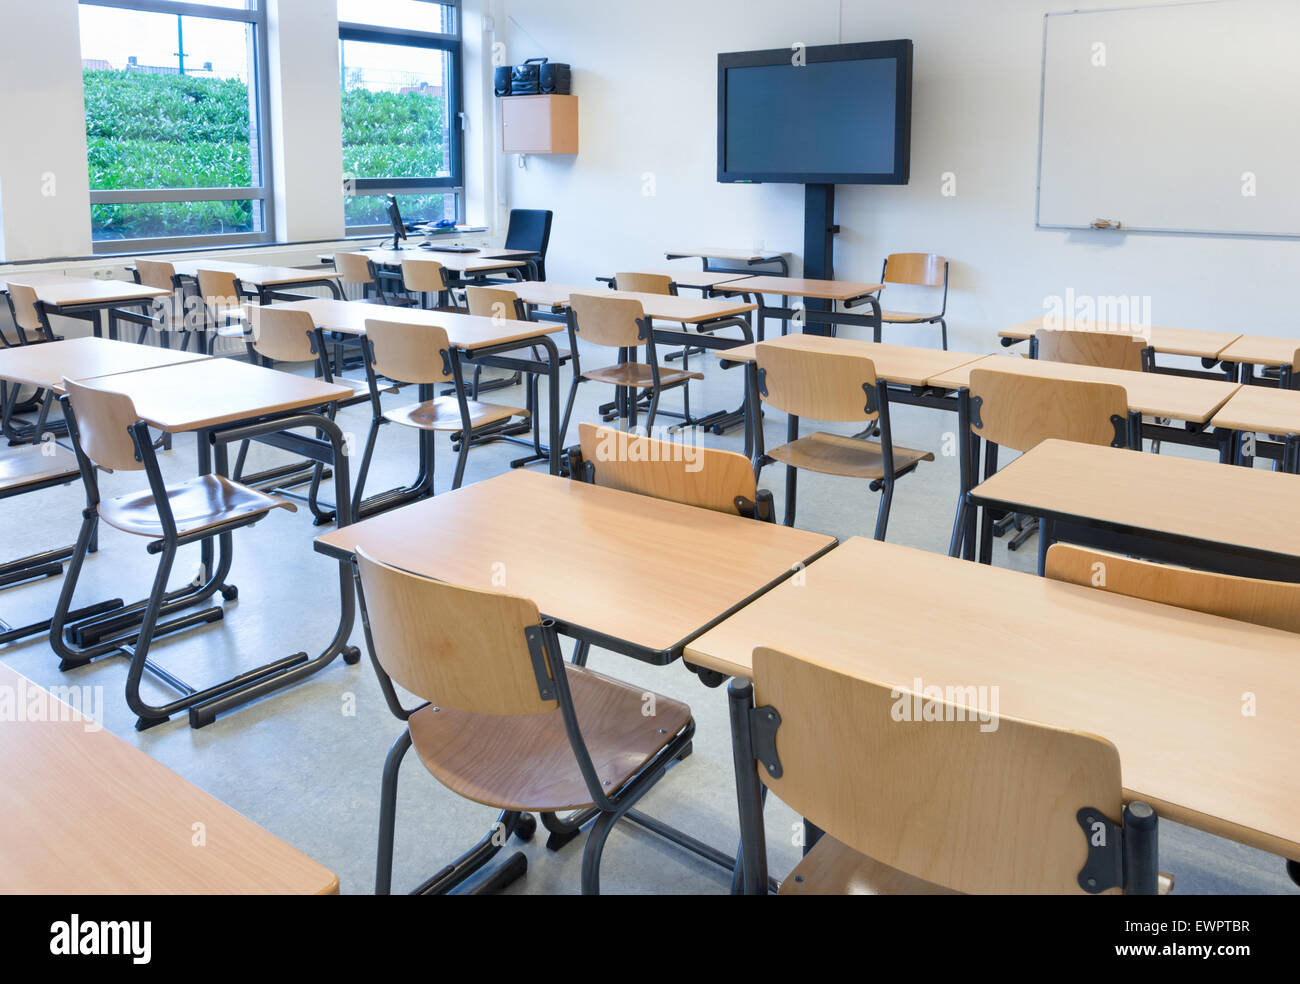 Empty Classroom With Tables And Chairs In School Building Stock